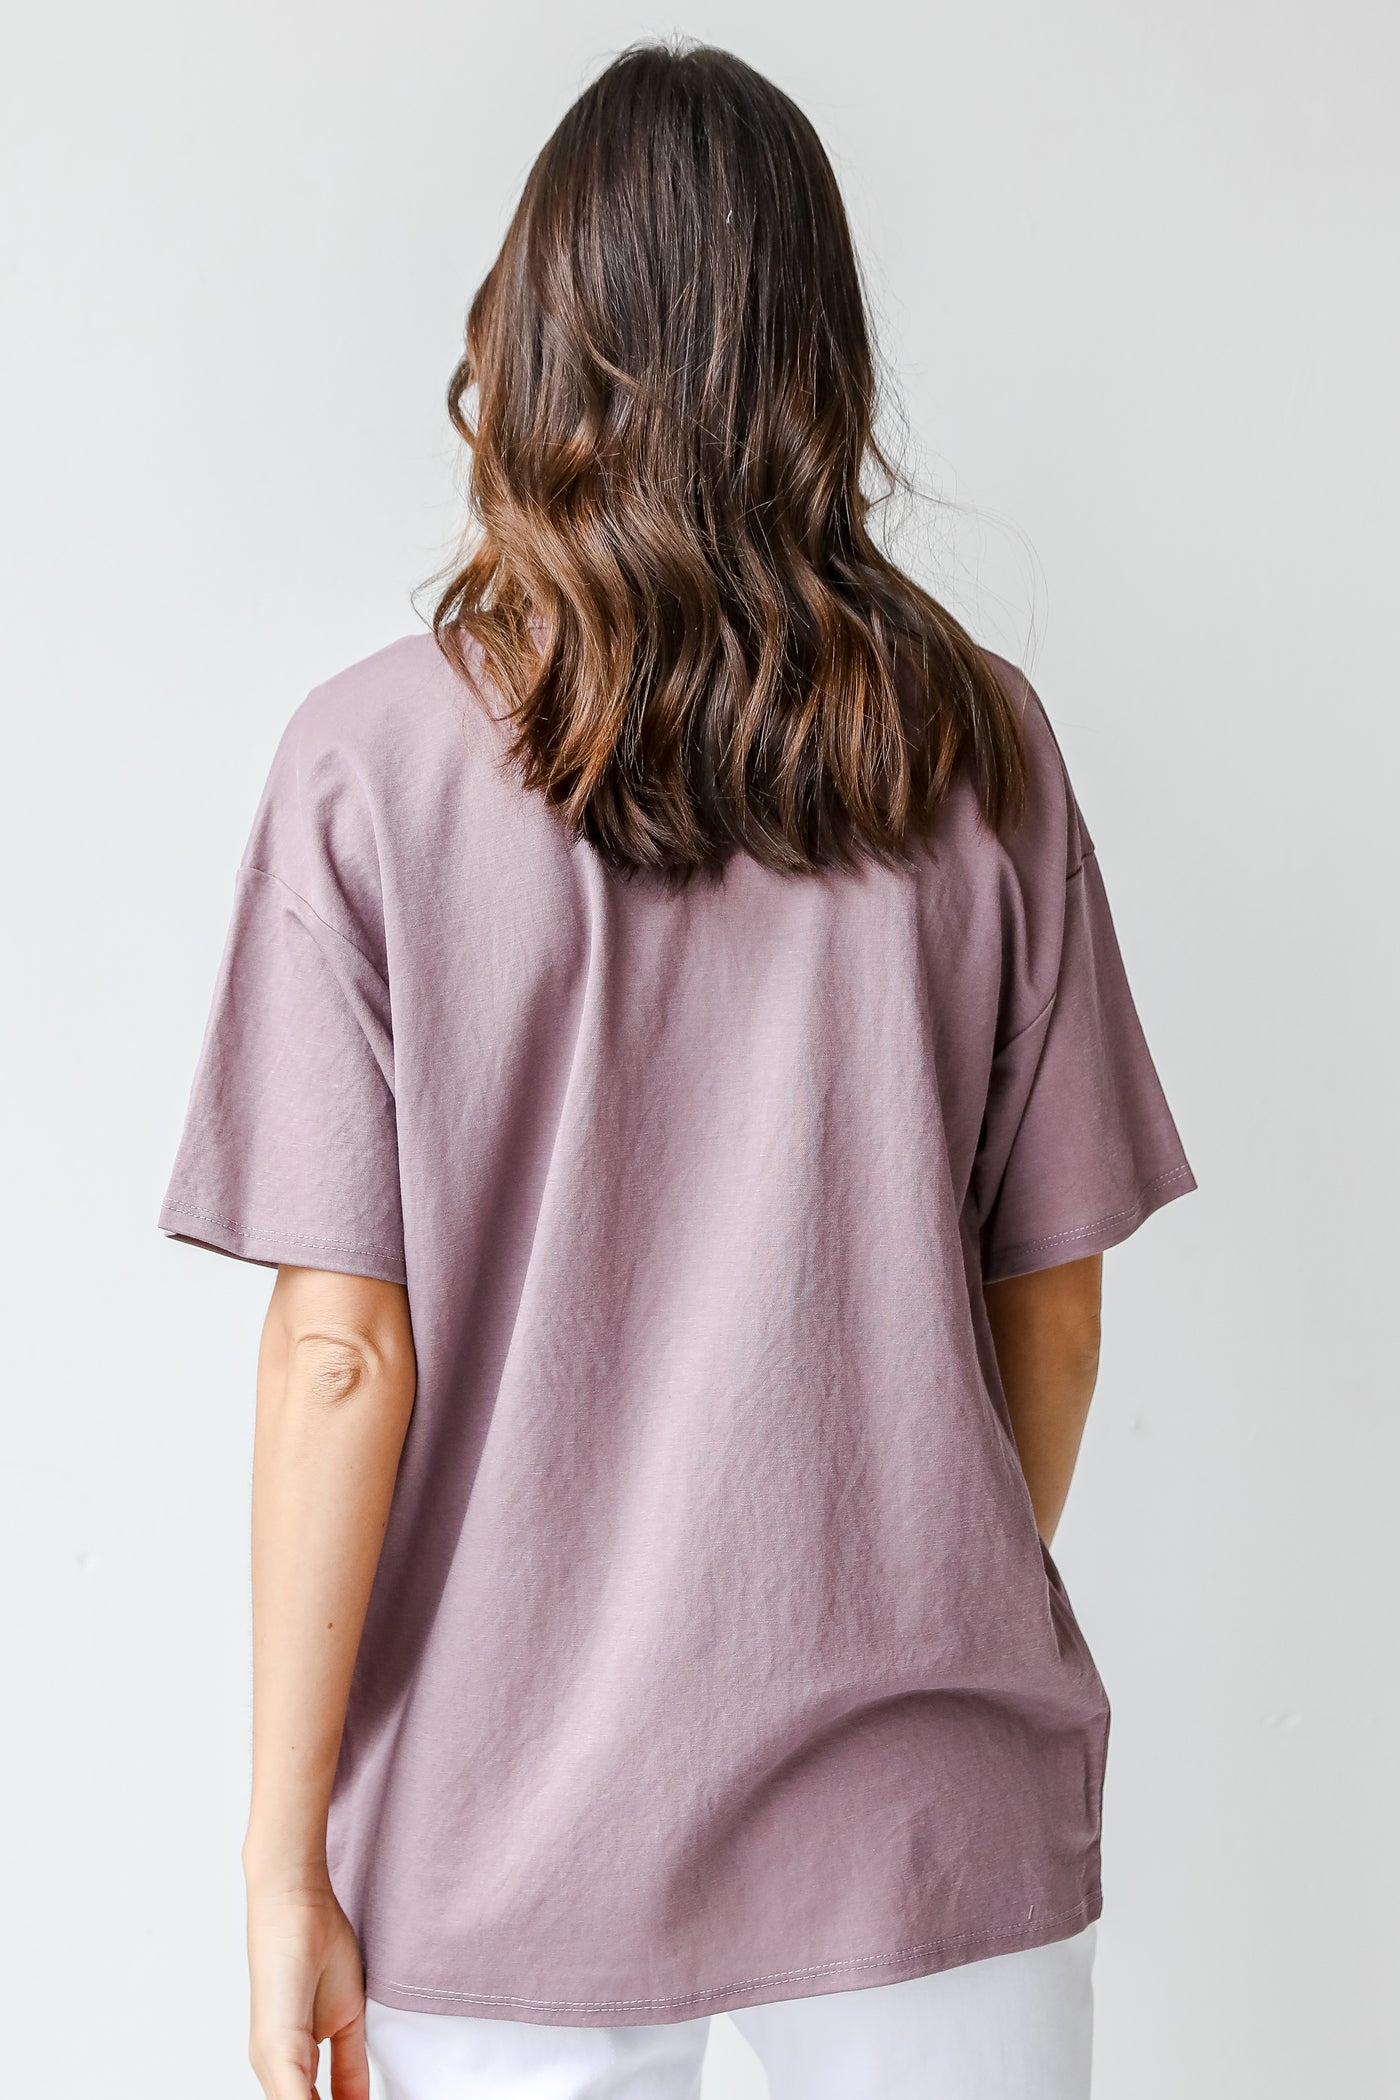 Tee in lavender back view